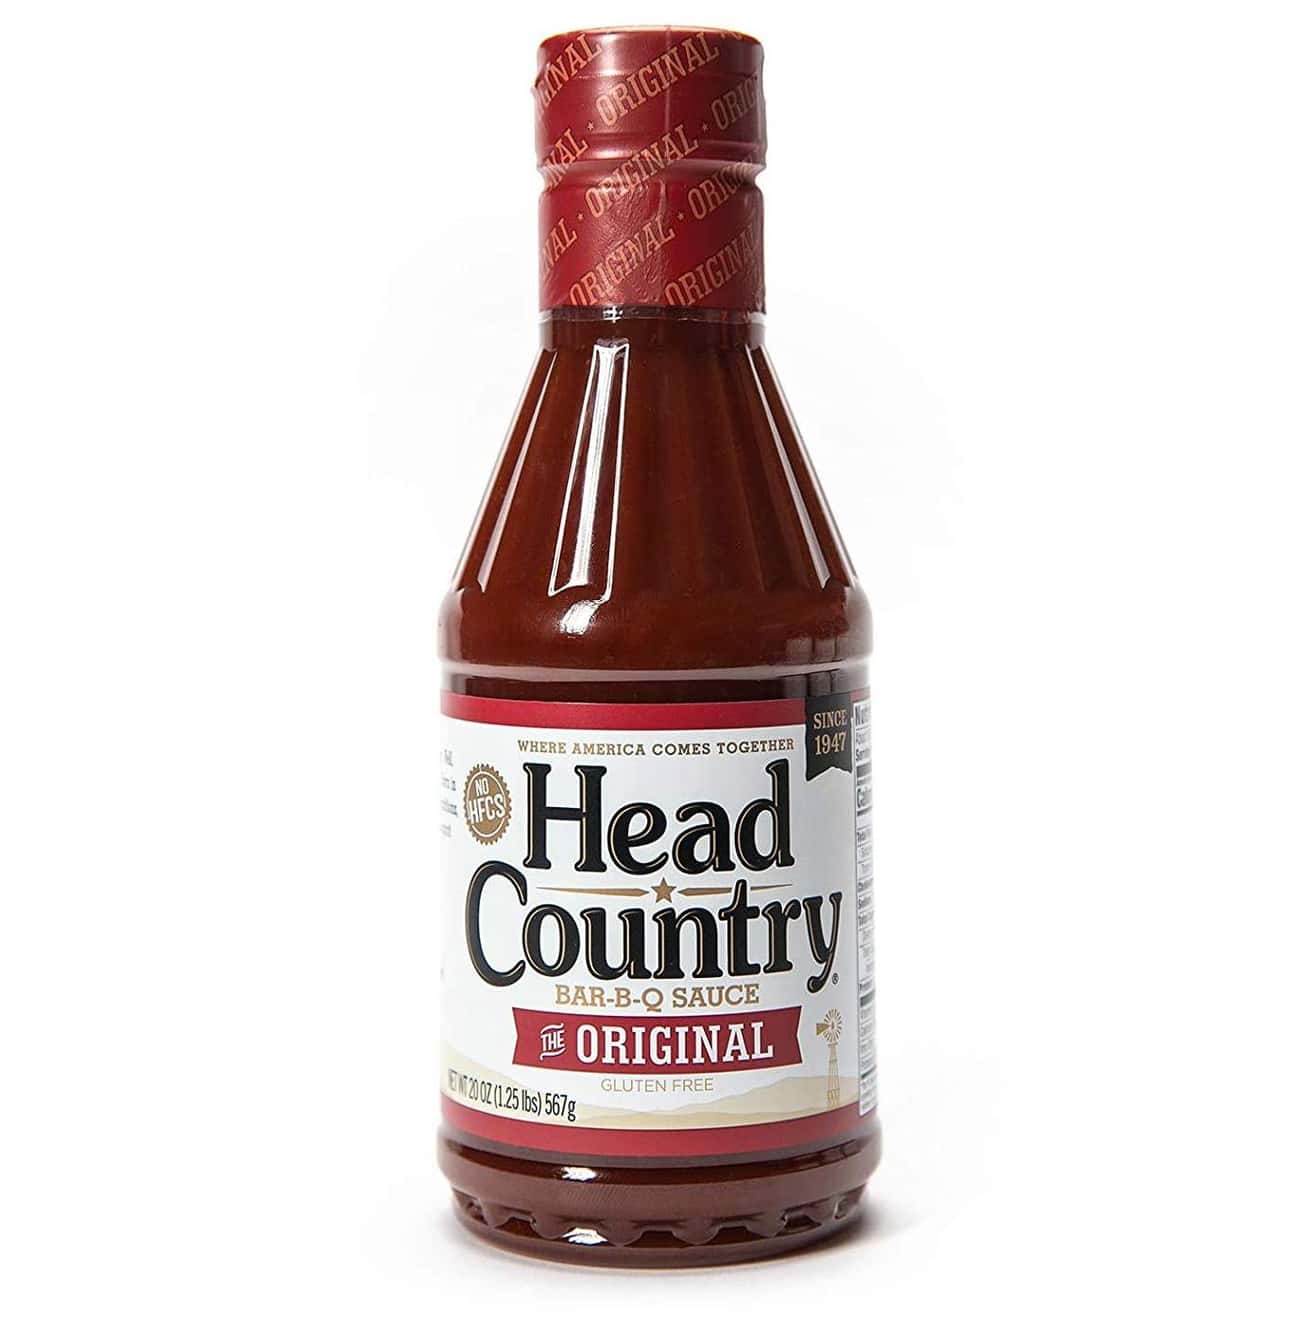 Pick Up Some Head Country Sauce